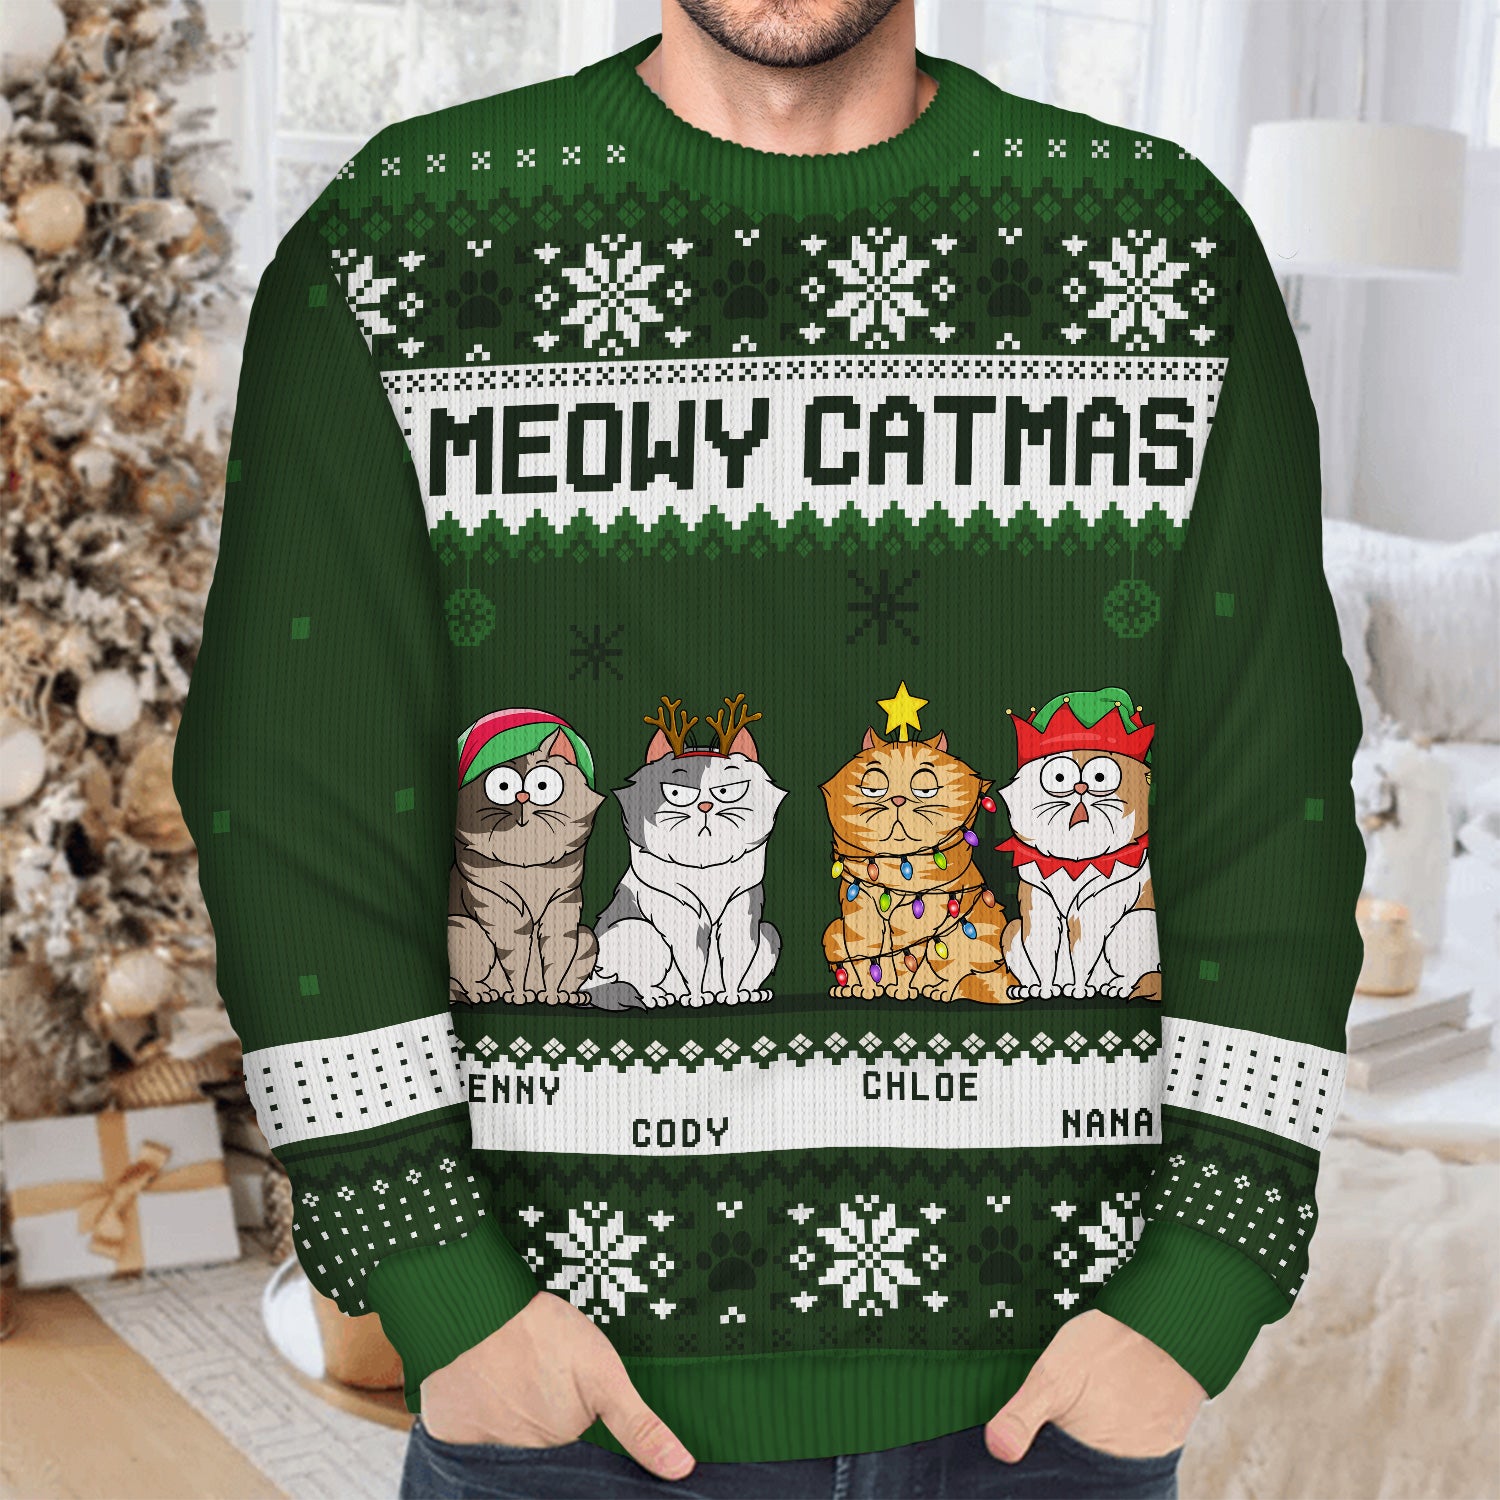 by Meowgicians Embroidery Stylish Cute Cat Sweaters - Dual Match Your Naughty Cat! Blue / M